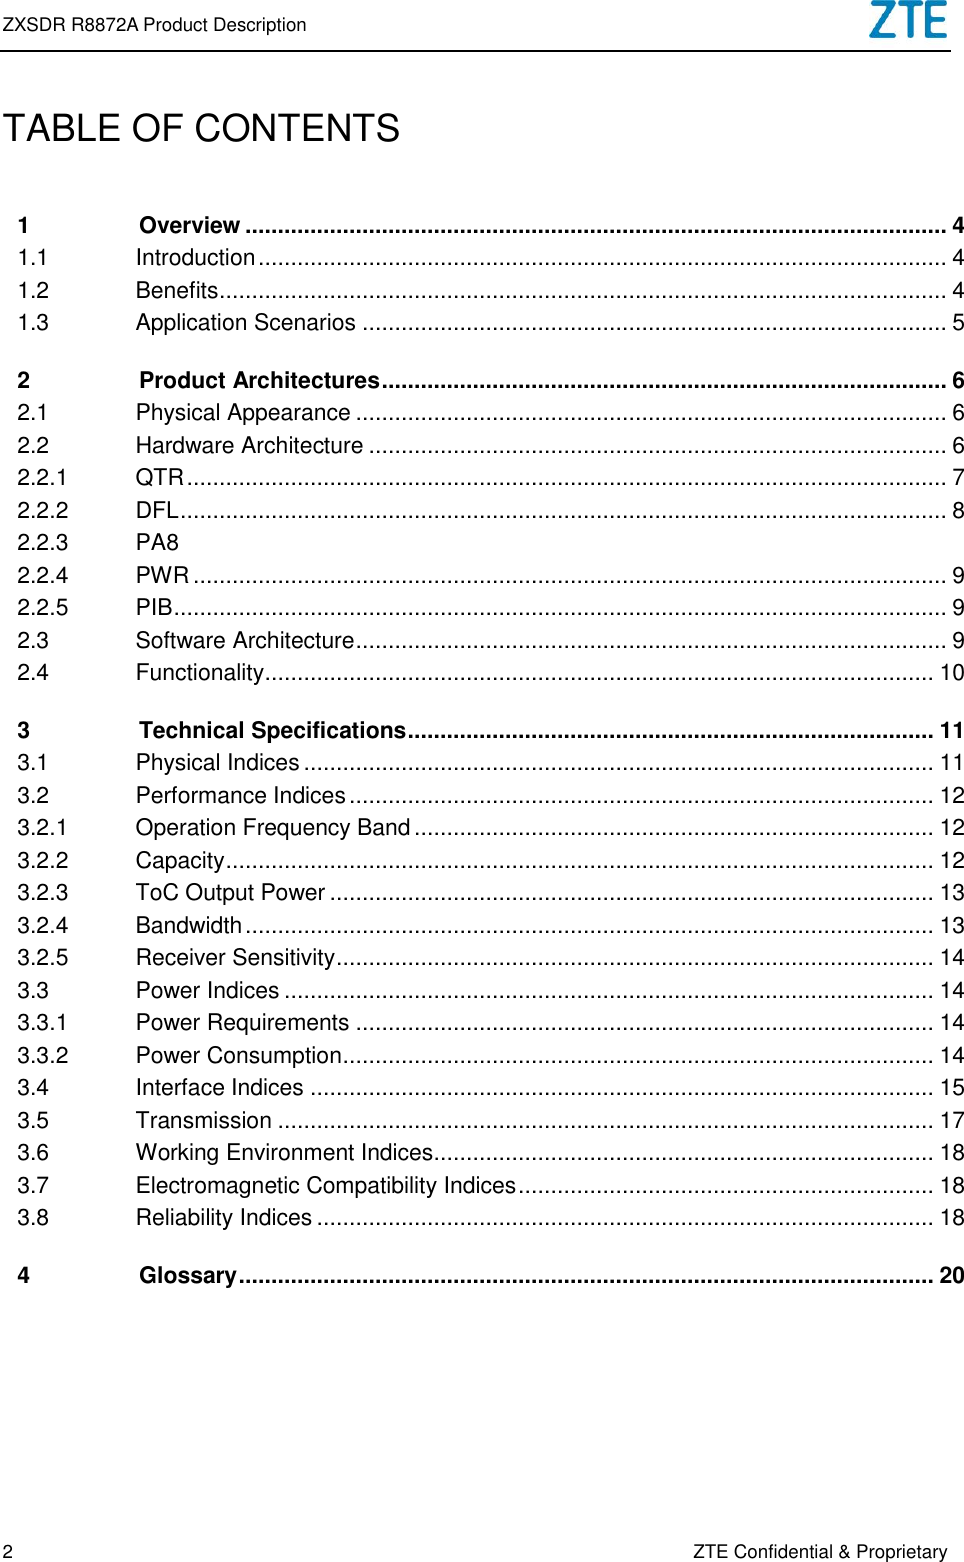 ZXSDR R8872A Product Description   2 ZTE Confidential &amp; Proprietary TABLE OF CONTENTS 1 Overview ............................................................................................................ 4 1.1 Introduction .......................................................................................................... 4 1.2 Benefits ................................................................................................................ 4 1.3 Application Scenarios .......................................................................................... 5 2 Product Architectures ....................................................................................... 6 2.1 Physical Appearance ........................................................................................... 6 2.2 Hardware Architecture ......................................................................................... 6 2.2.1 QTR ..................................................................................................................... 7 2.2.2 DFL ...................................................................................................................... 8 2.2.3 PA 8 2.2.4 PWR .................................................................................................................... 9 2.2.5 PIB ....................................................................................................................... 9 2.3 Software Architecture ........................................................................................... 9 2.4 Functionality ....................................................................................................... 10 3 Technical Specifications ................................................................................. 11 3.1 Physical Indices ................................................................................................. 11 3.2 Performance Indices .......................................................................................... 12 3.2.1 Operation Frequency Band ................................................................................ 12 3.2.2 Capacity ............................................................................................................. 12 3.2.3 ToC Output Power ............................................................................................. 13 3.2.4 Bandwidth .......................................................................................................... 13 3.2.5 Receiver Sensitivity ............................................................................................ 14 3.3 Power Indices .................................................................................................... 14 3.3.1 Power Requirements ......................................................................................... 14 3.3.2 Power Consumption ........................................................................................... 14 3.4 Interface Indices ................................................................................................ 15 3.5 Transmission ..................................................................................................... 17 3.6 Working Environment Indices............................................................................. 18 3.7 Electromagnetic Compatibility Indices ................................................................ 18 3.8 Reliability Indices ............................................................................................... 18 4 Glossary ........................................................................................................... 20    